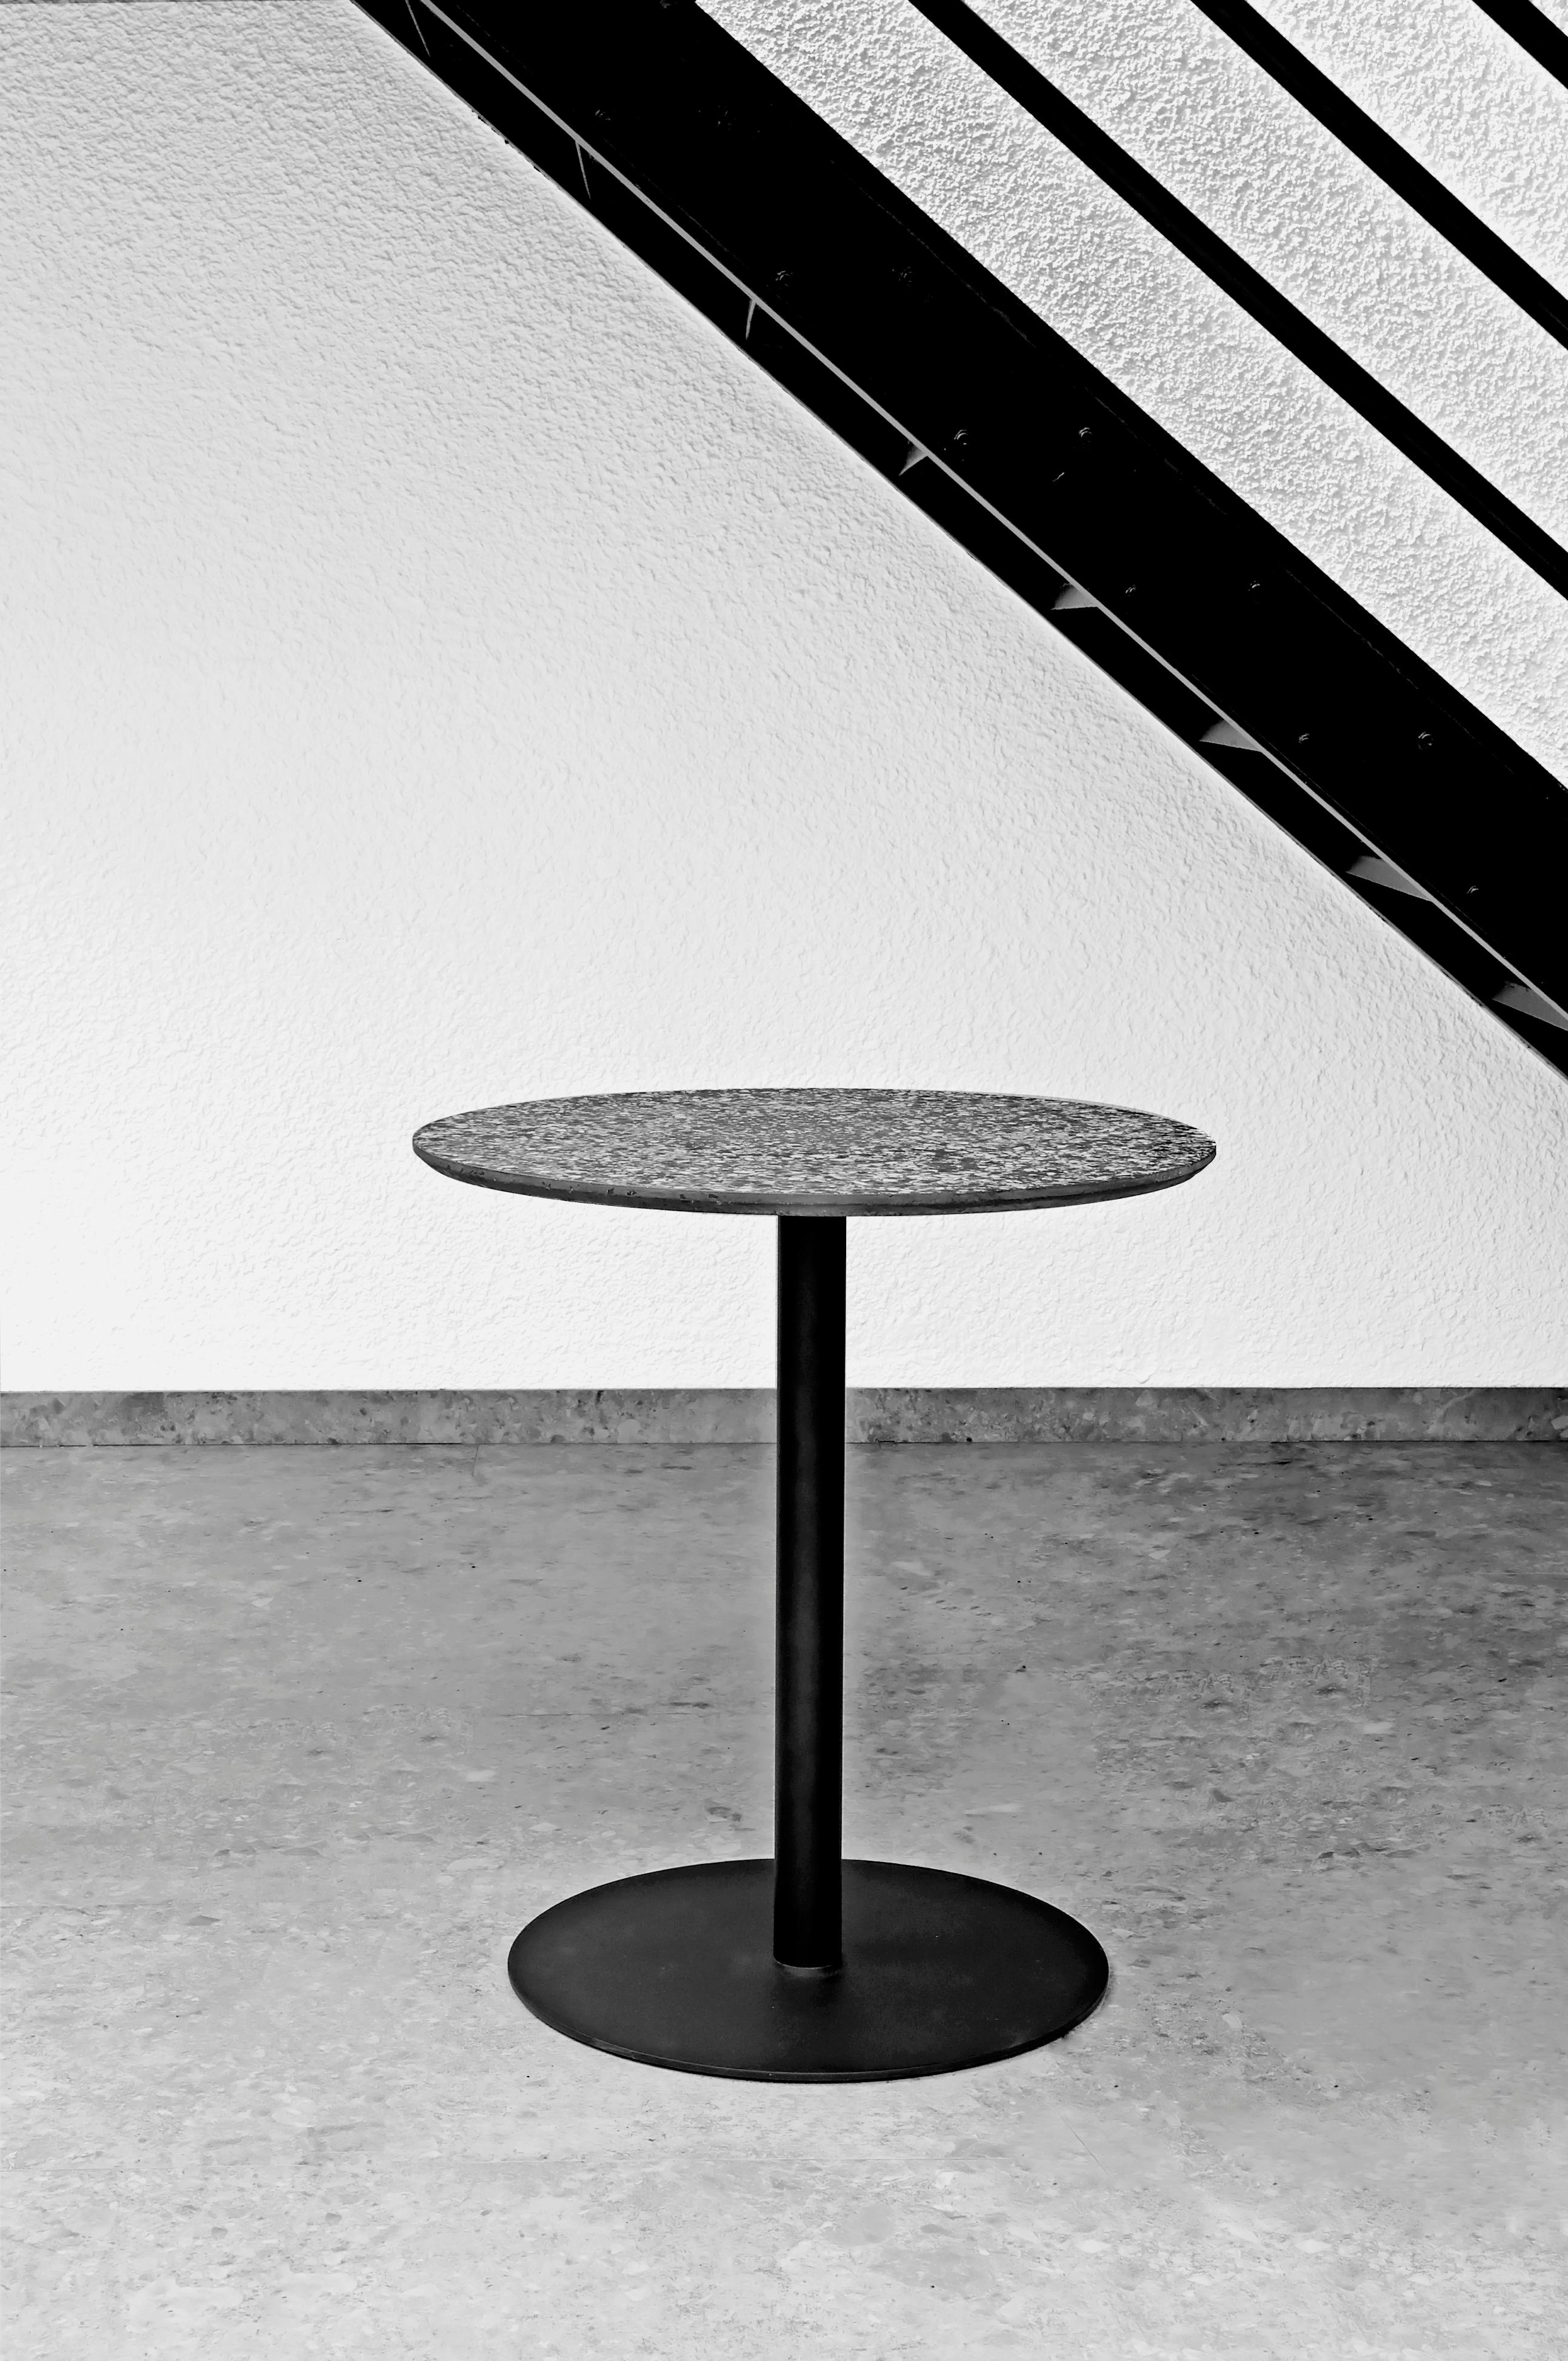 'I' is a collection of tables: coffee / side tables, dining tables, bar tables. 
The base and the structures are in steel, and the tabletop is in terrazzo.
by Bentu design


Many models available:

Square dining table - Terrazzo black / white